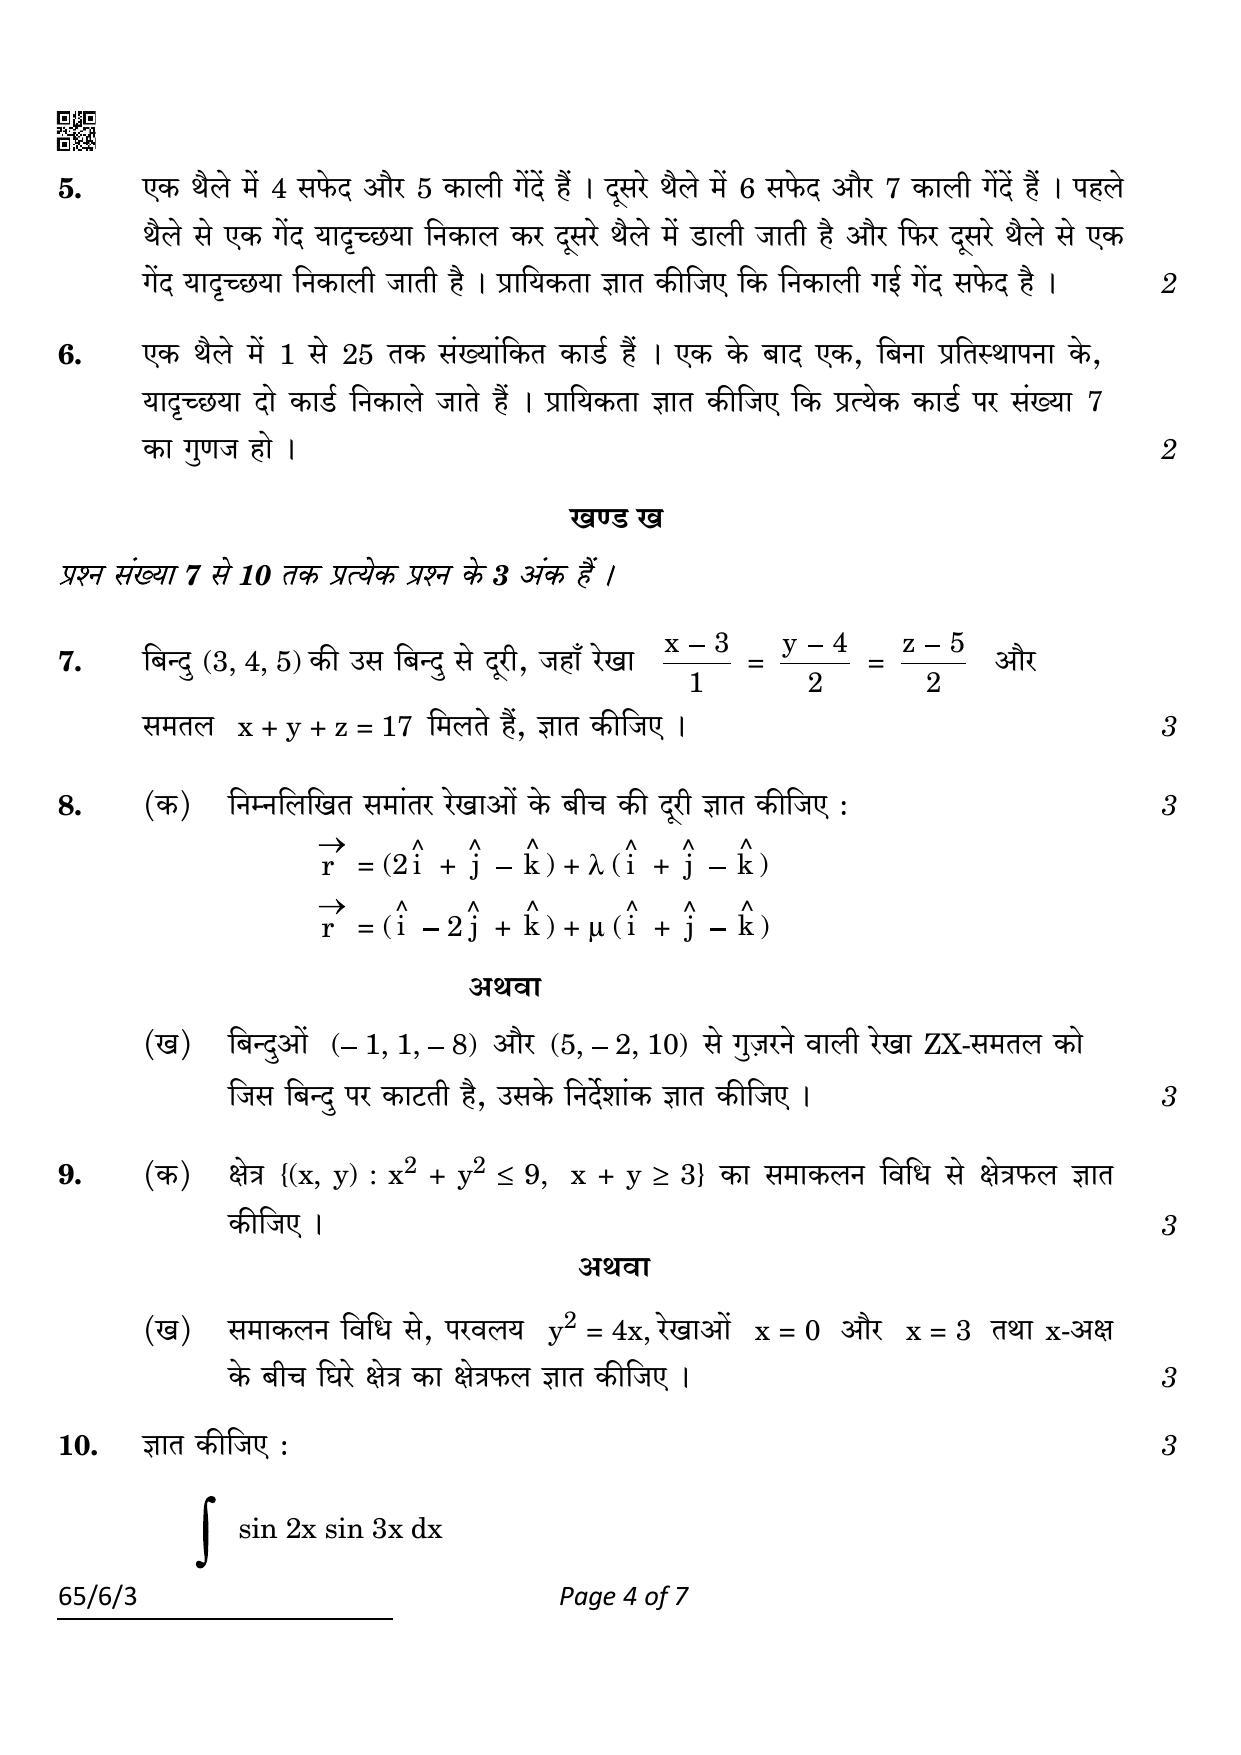 CBSE Class 12 65-6-3 Maths 2022 Compartment Question Paper - Page 4